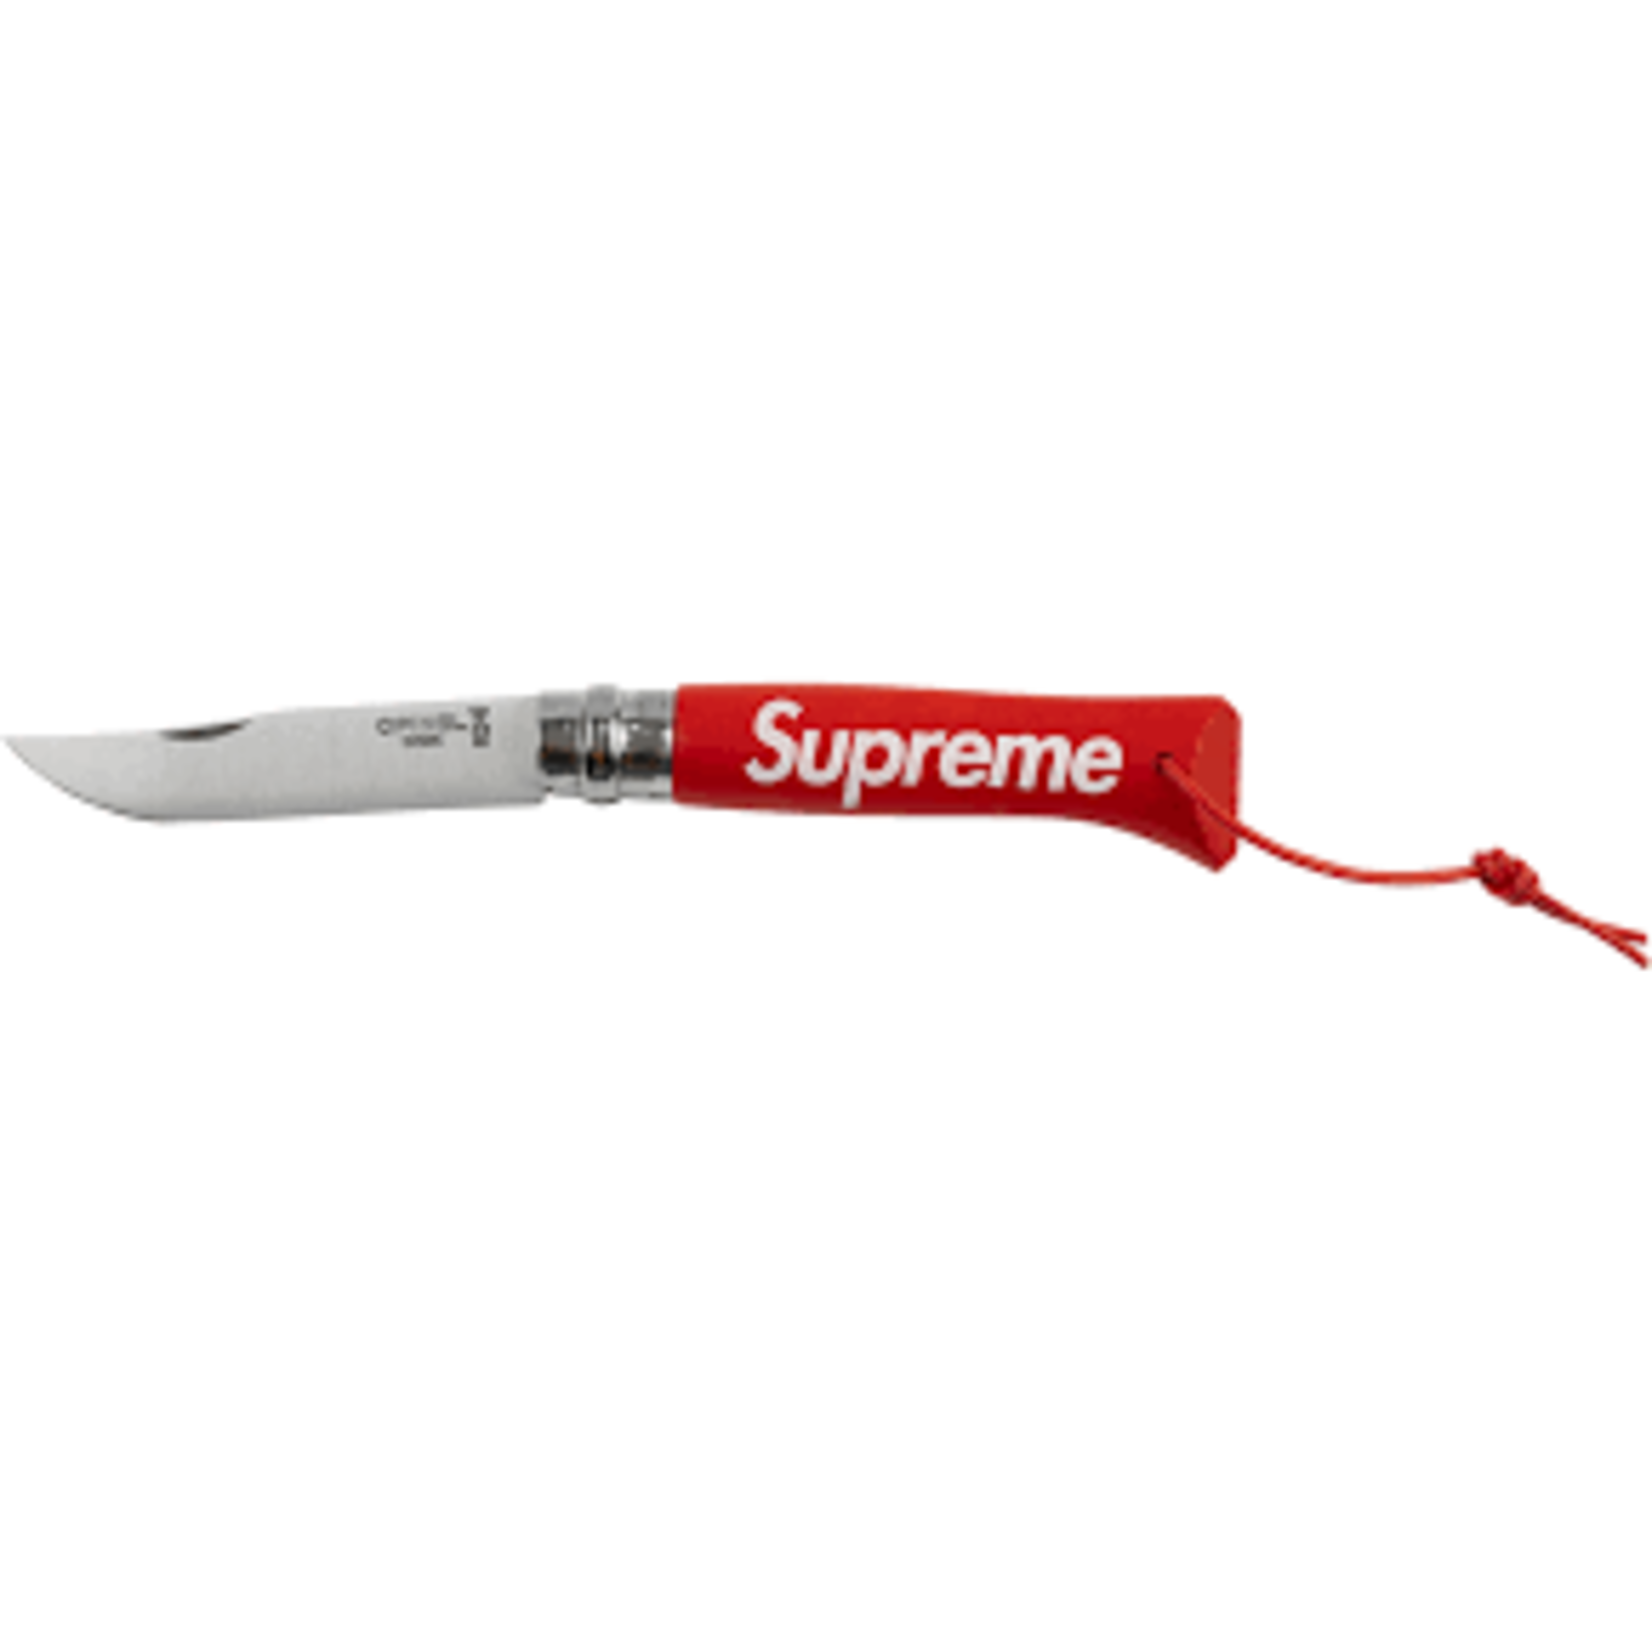 Supreme Supreme Opienl No.08 Folding Knife red Size OS, DS BRAND